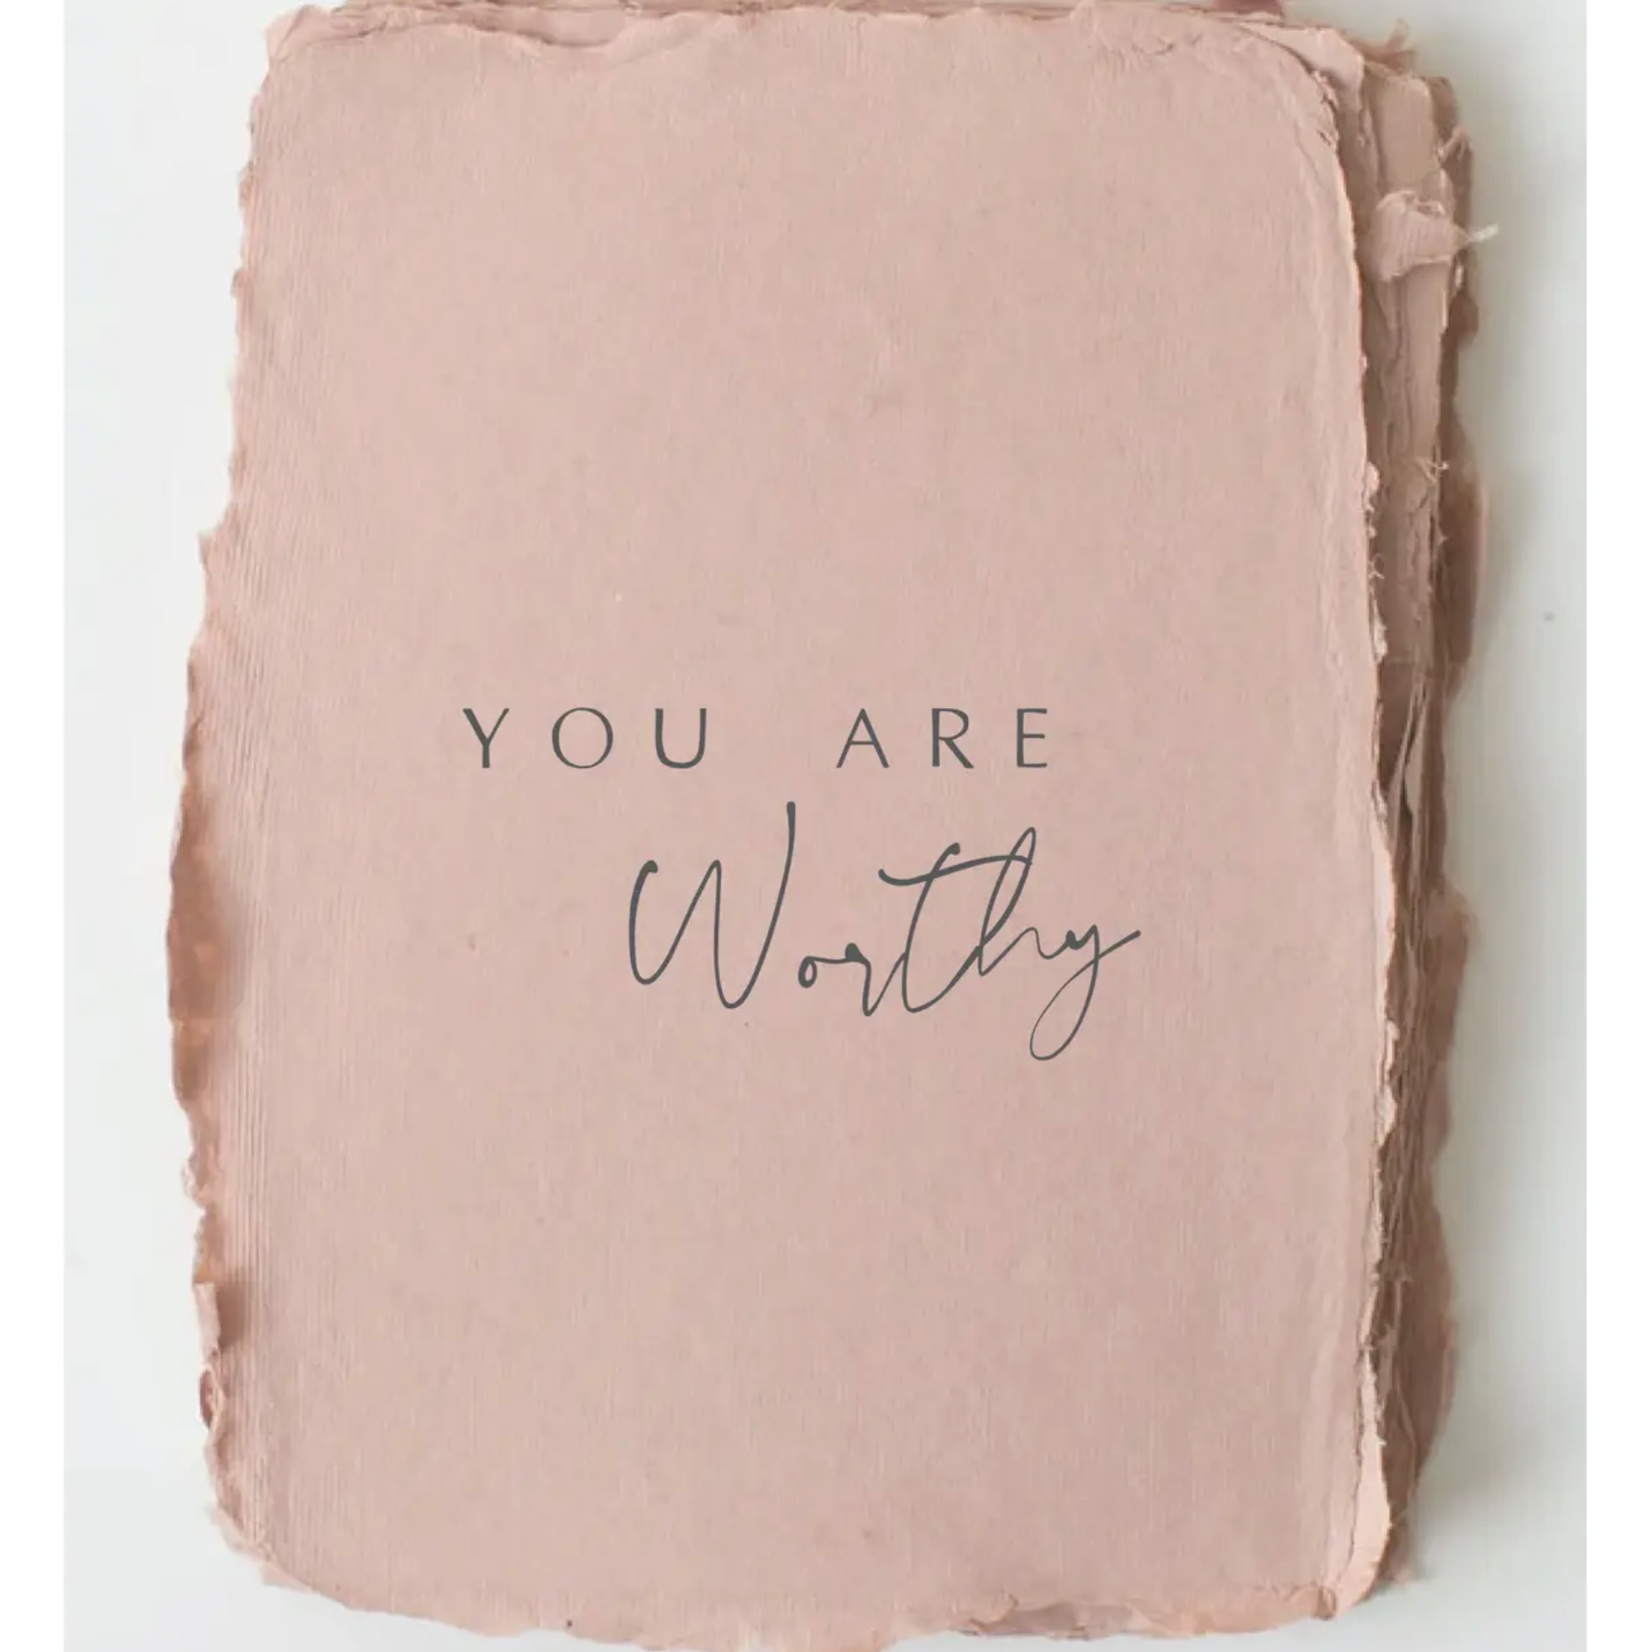 *"You Are Worthy" Card